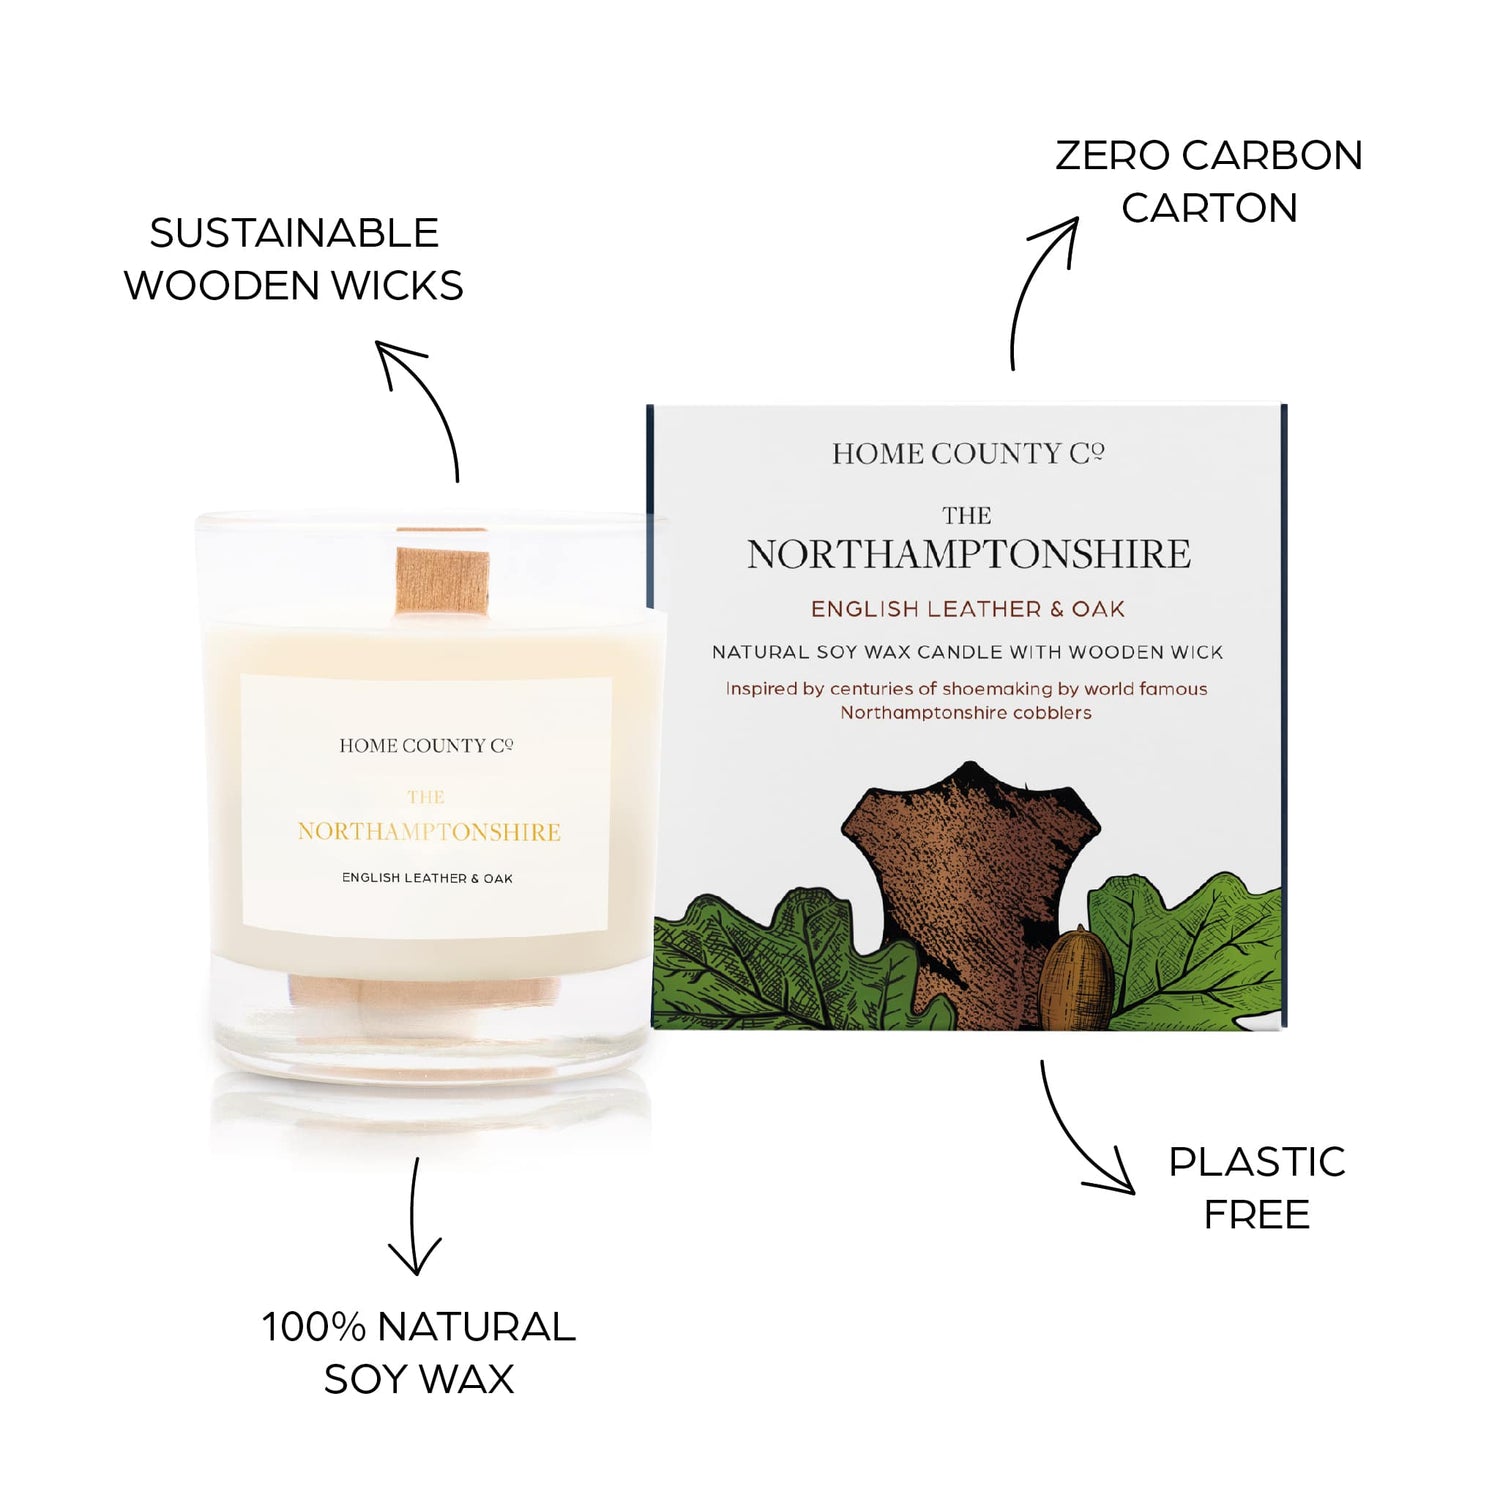 Sustainable candle credentials are shown around the leather scented candle image - sustainable wooden wicks, zero carbon carton, 100% natural soy wax, plastic free